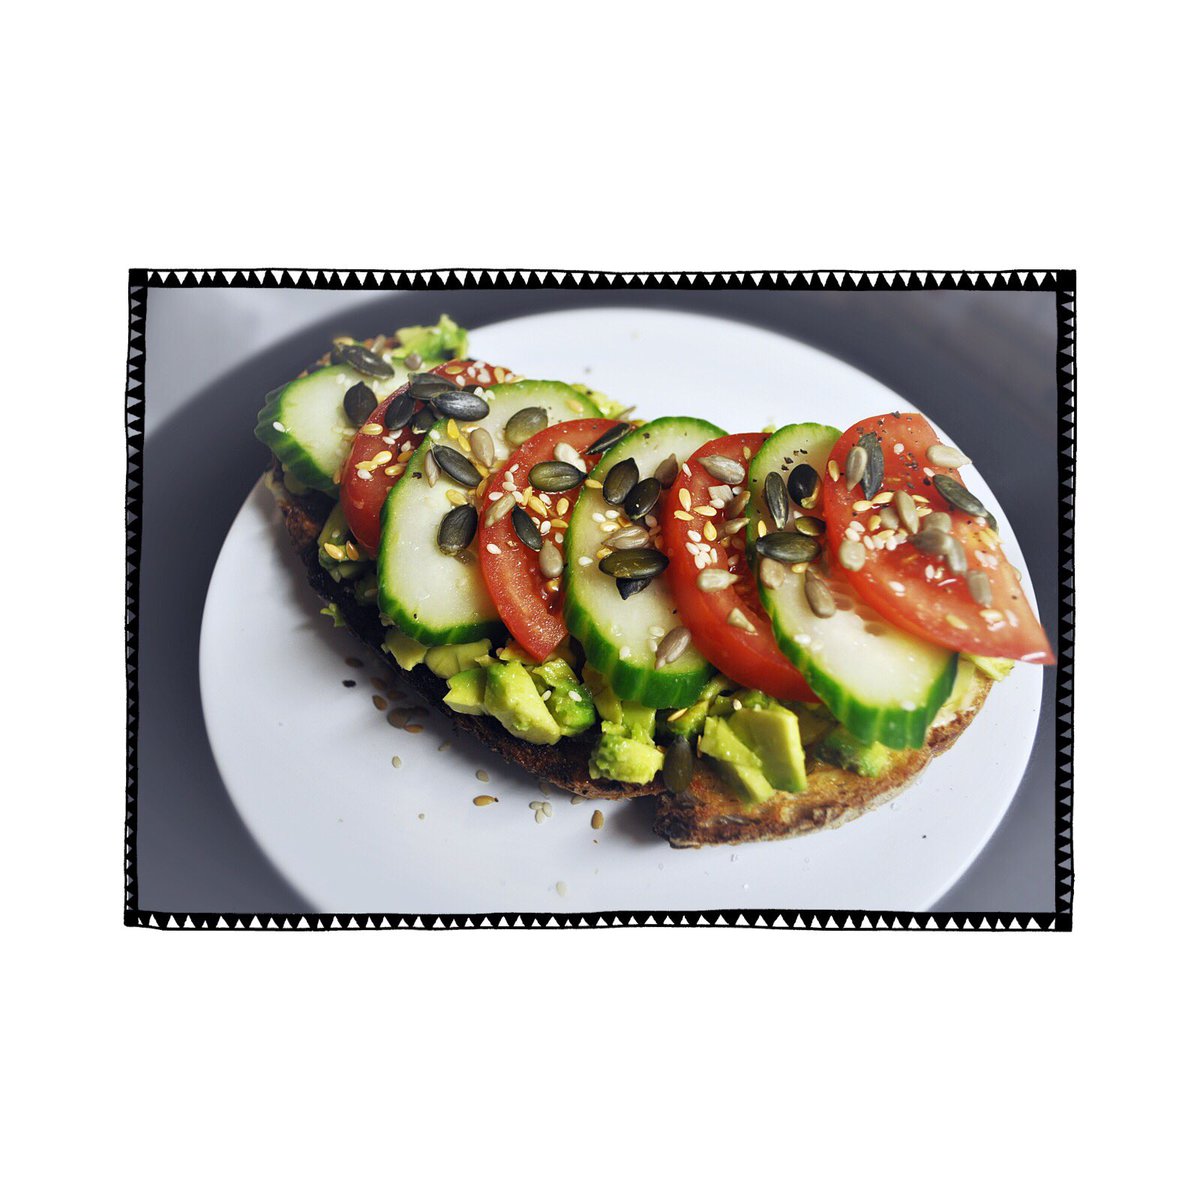 Light Brunch anyone? Smashed seasoned avocado on sourdough toast topped with vine tomato, cucumber and mixed seeds 😉 And there’s more but that’s for you to find out! 😉😋 #deptford #deptfordcafe #vgnldn #veganlondon #southlondonvegan #lewisham #deptfordhighstreet #vegan #se8